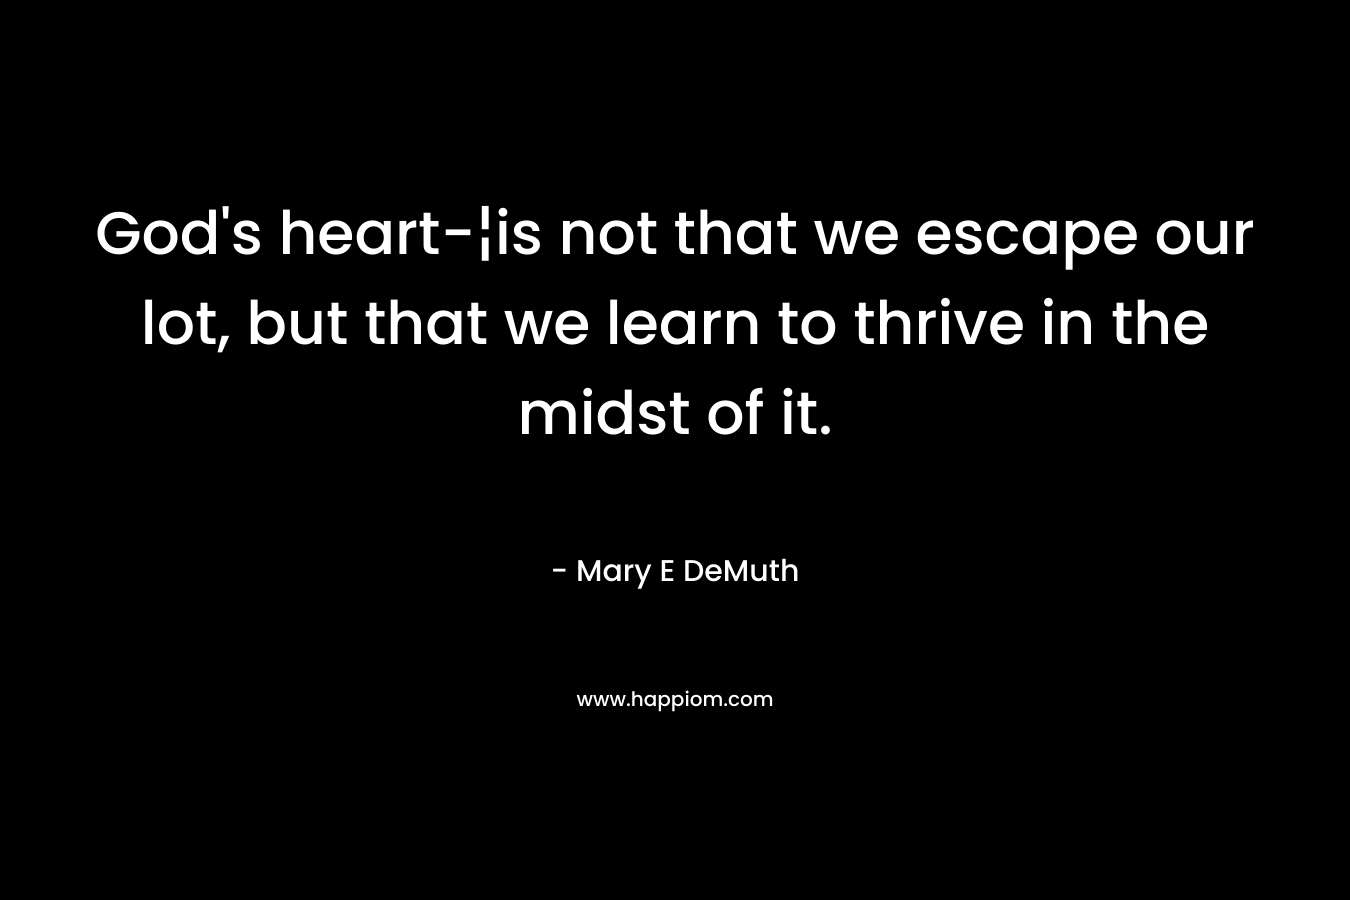 God’s heart-¦is not that we escape our lot, but that we learn to thrive in the midst of it. – Mary E DeMuth